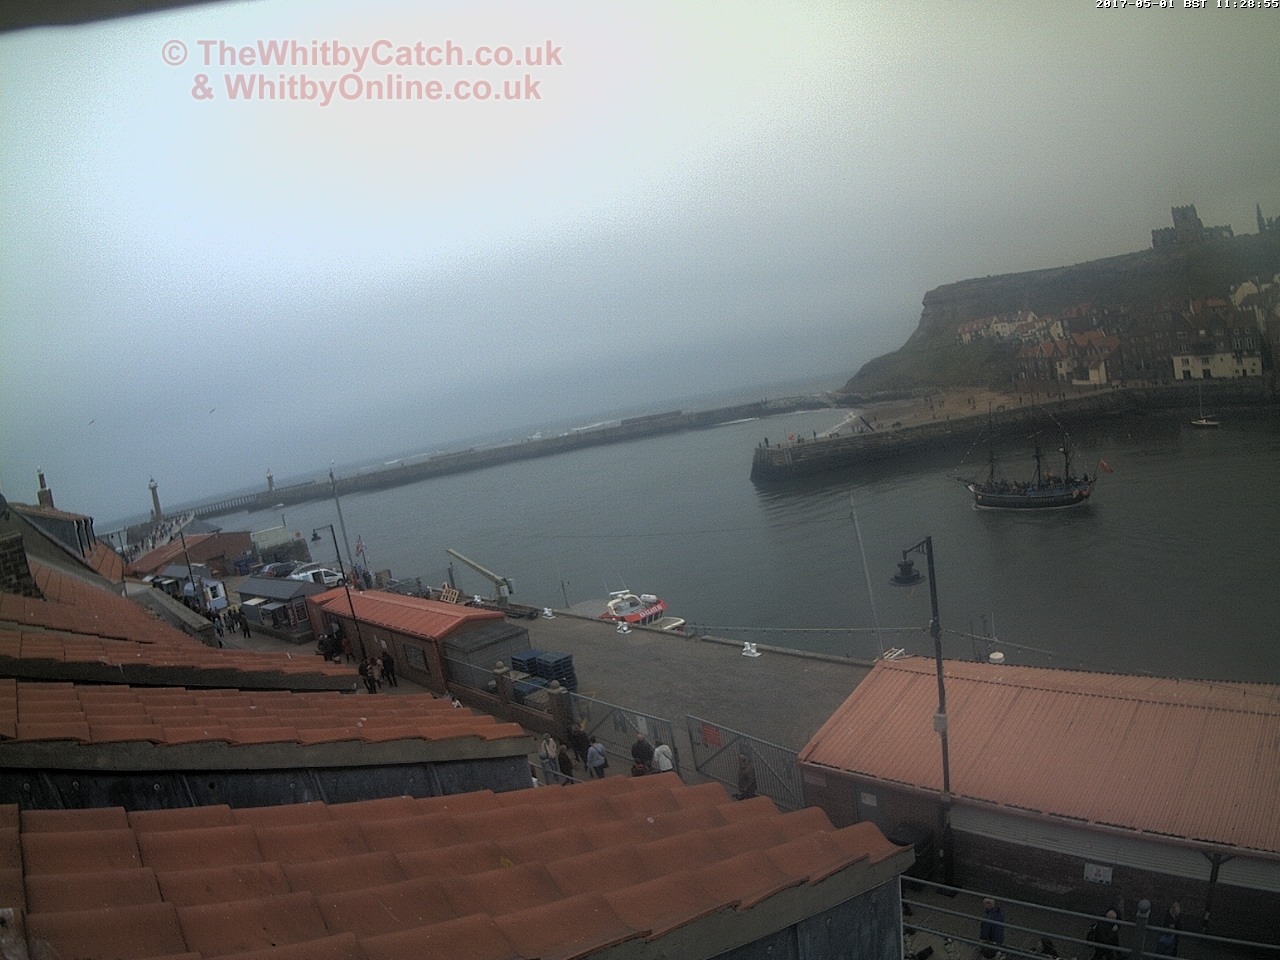 Whitby Mon 1st May 2017 11:29.